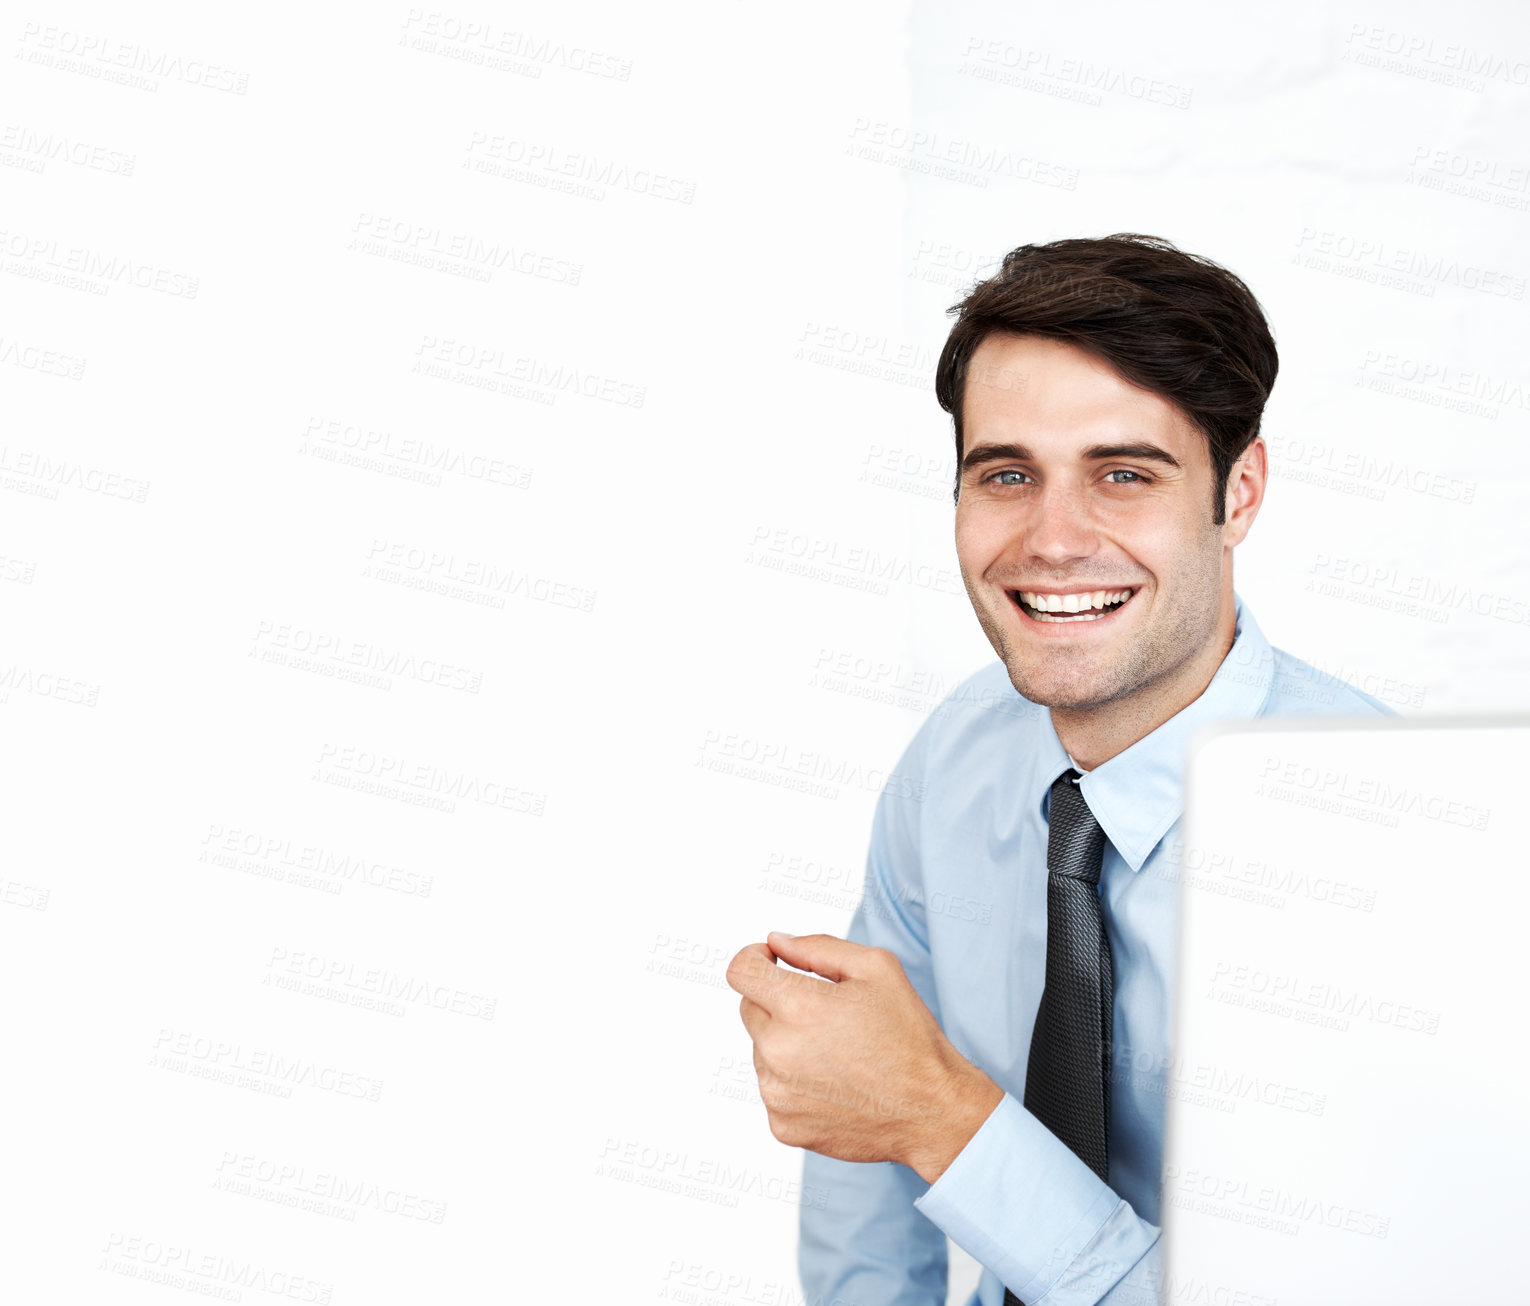 Buy stock photo Smiling young office worker sitting against a white background